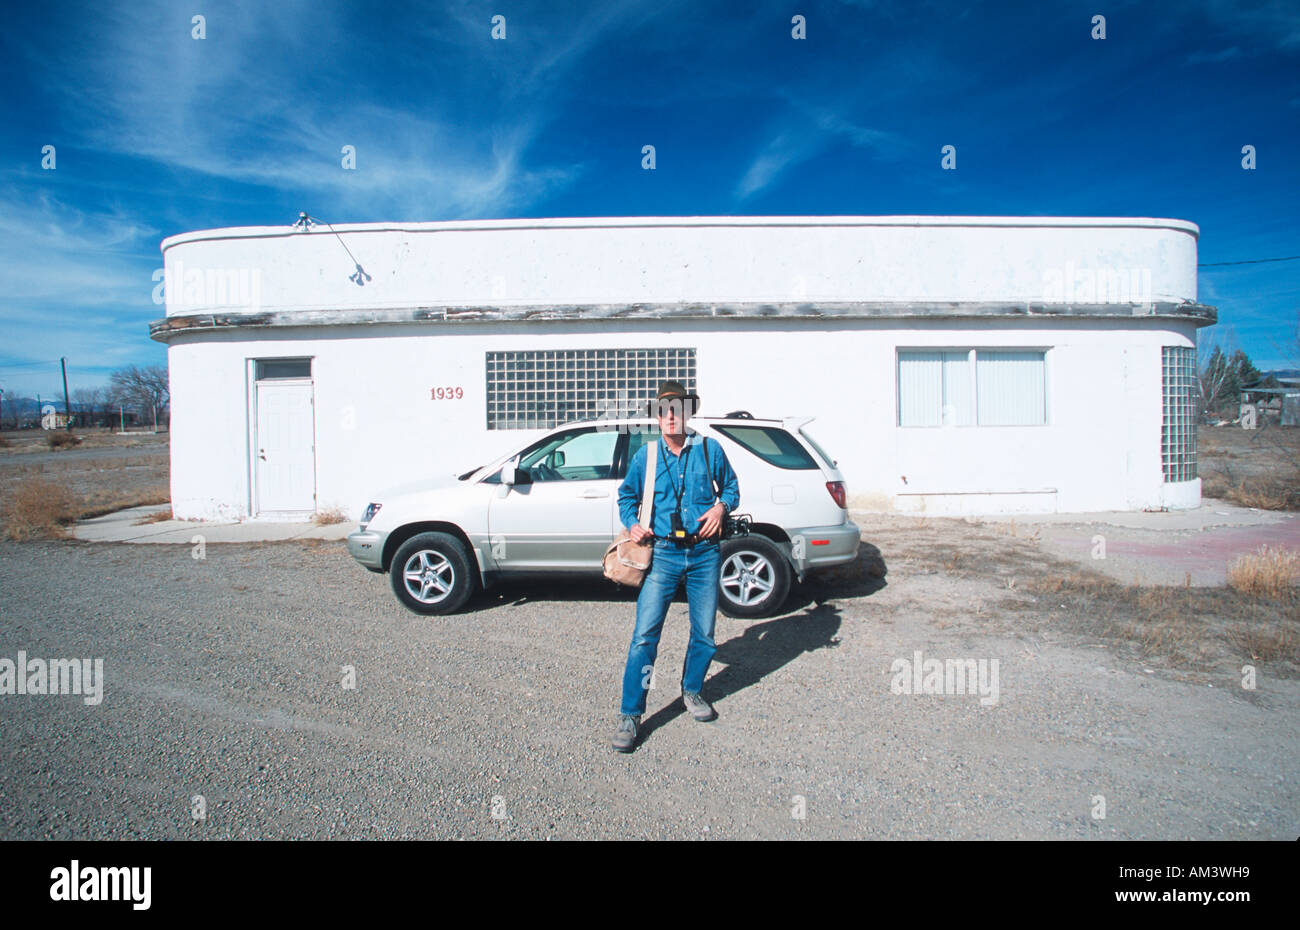 Joe Sohm the photographer posing with Lexus RX300 in front of deserted building in western states Stock Photo